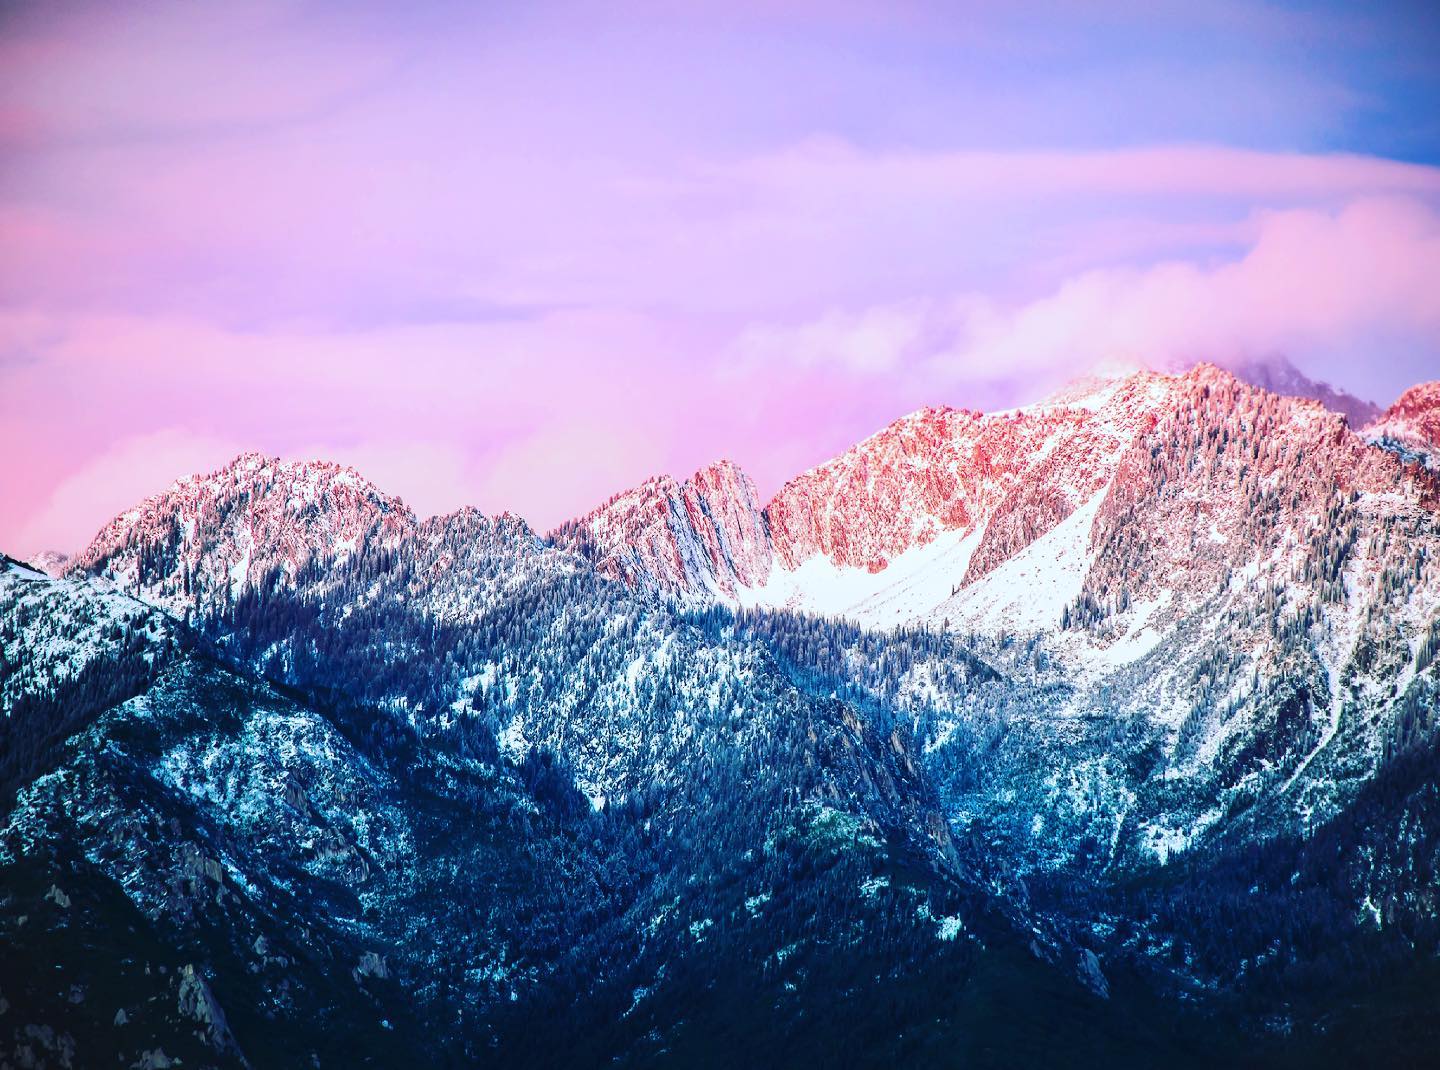 Snow-capped mountain peaks bathed in pink and purple hues of dusk or dawn with dense forests on their slopes under a soft-colored sky.